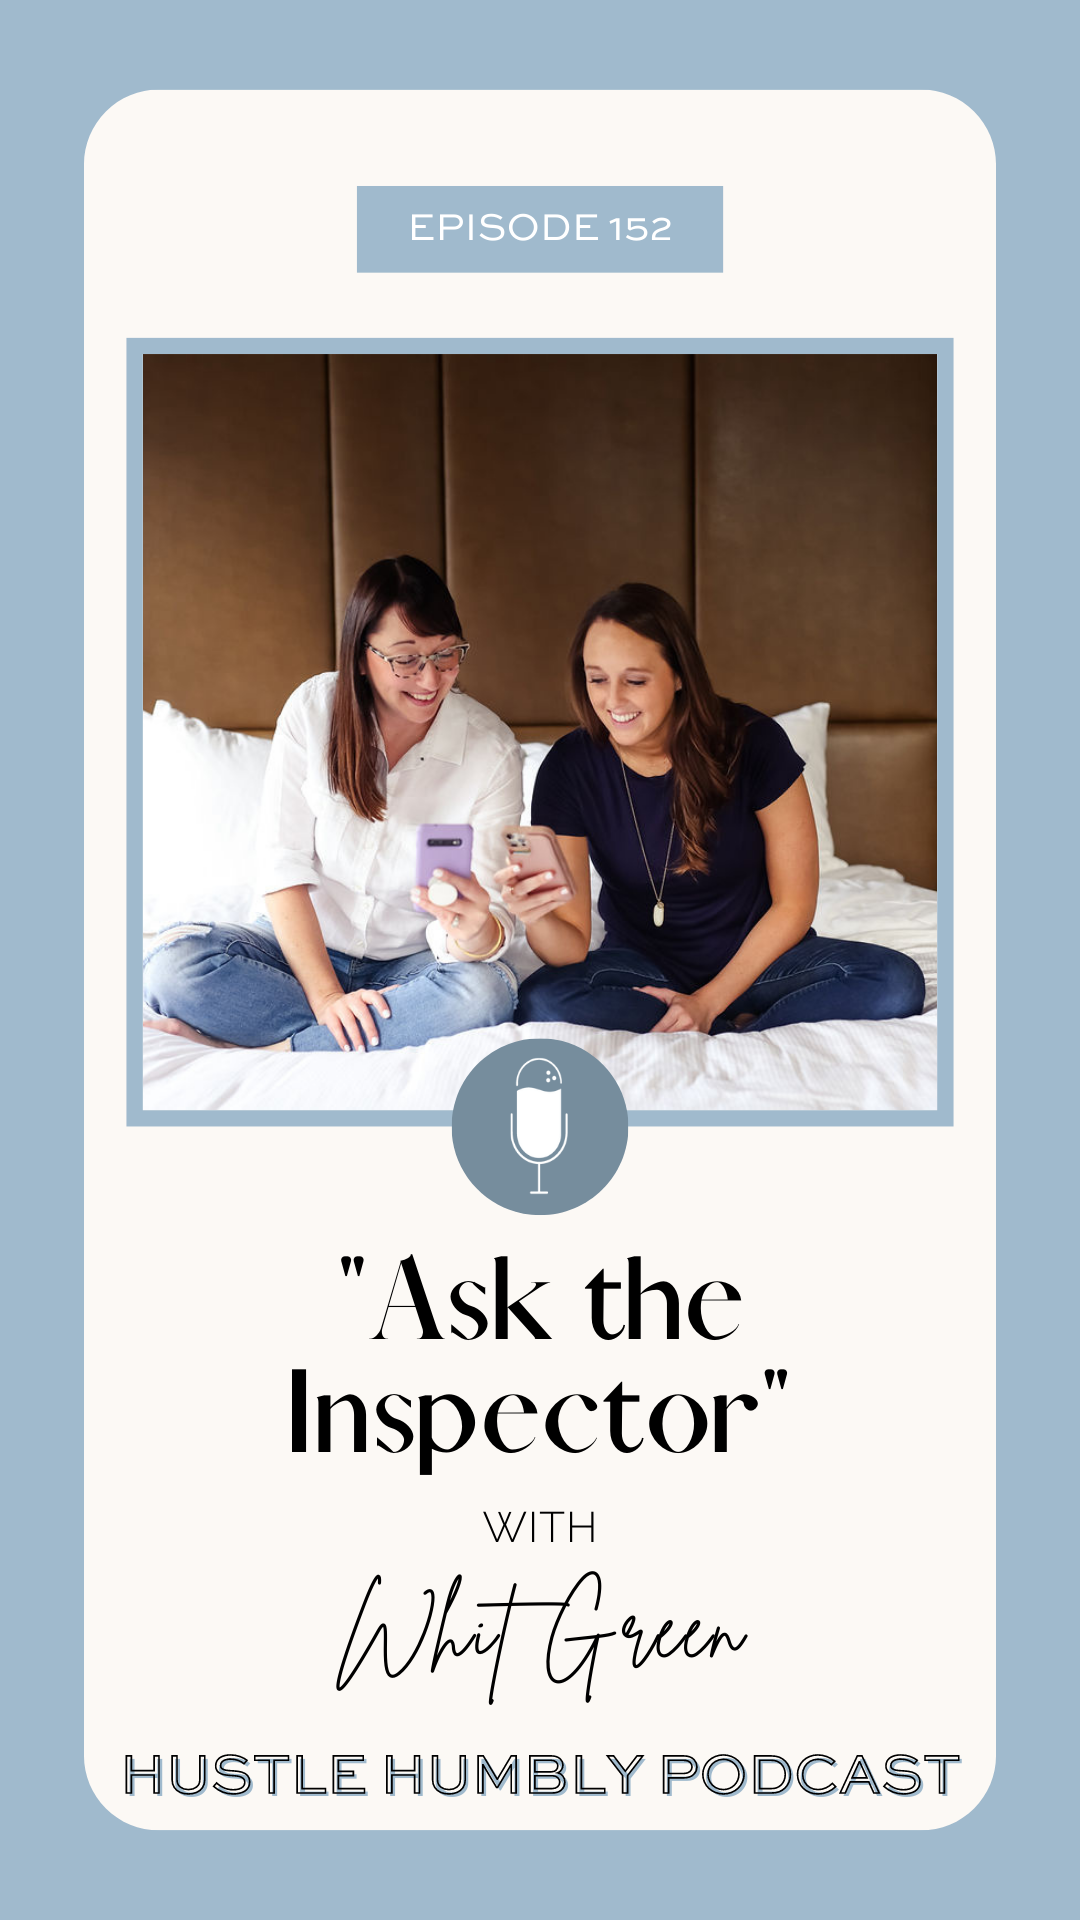 Hustle Humbly Podcast 152: Ask the Inspector